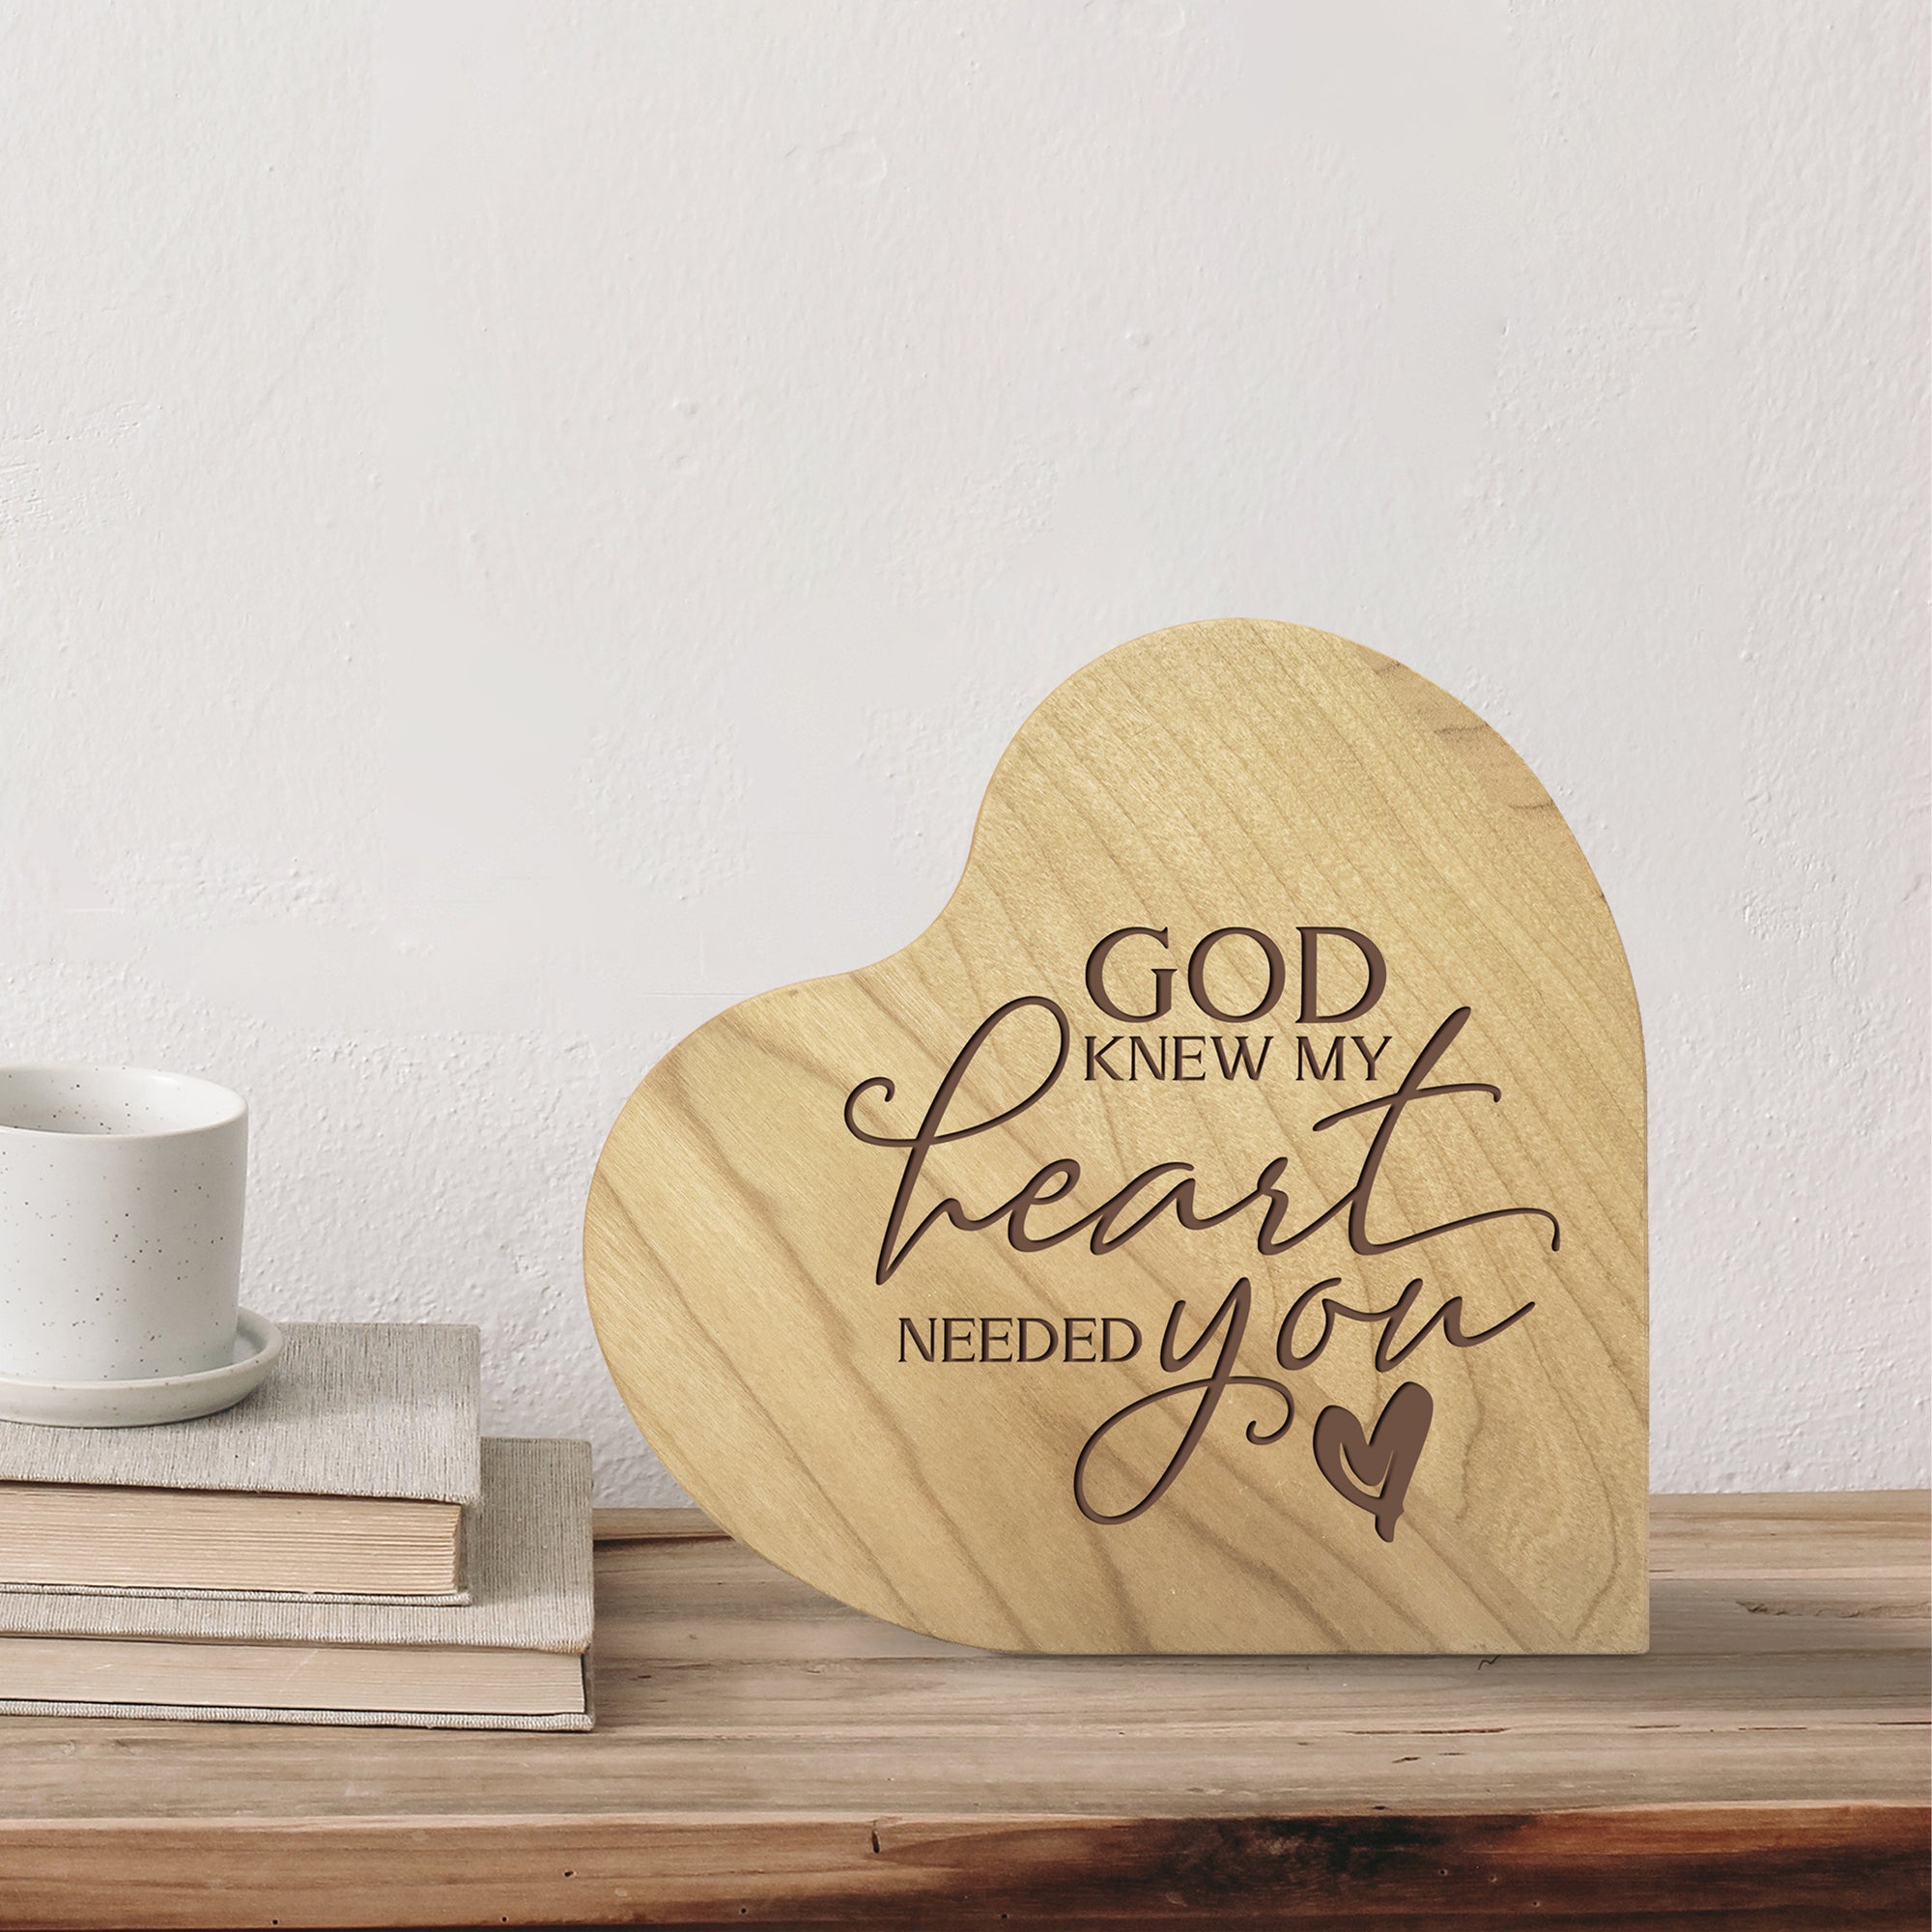 Beautifully designed heart-shaped memorial sign, a touching tribute for funeral decor